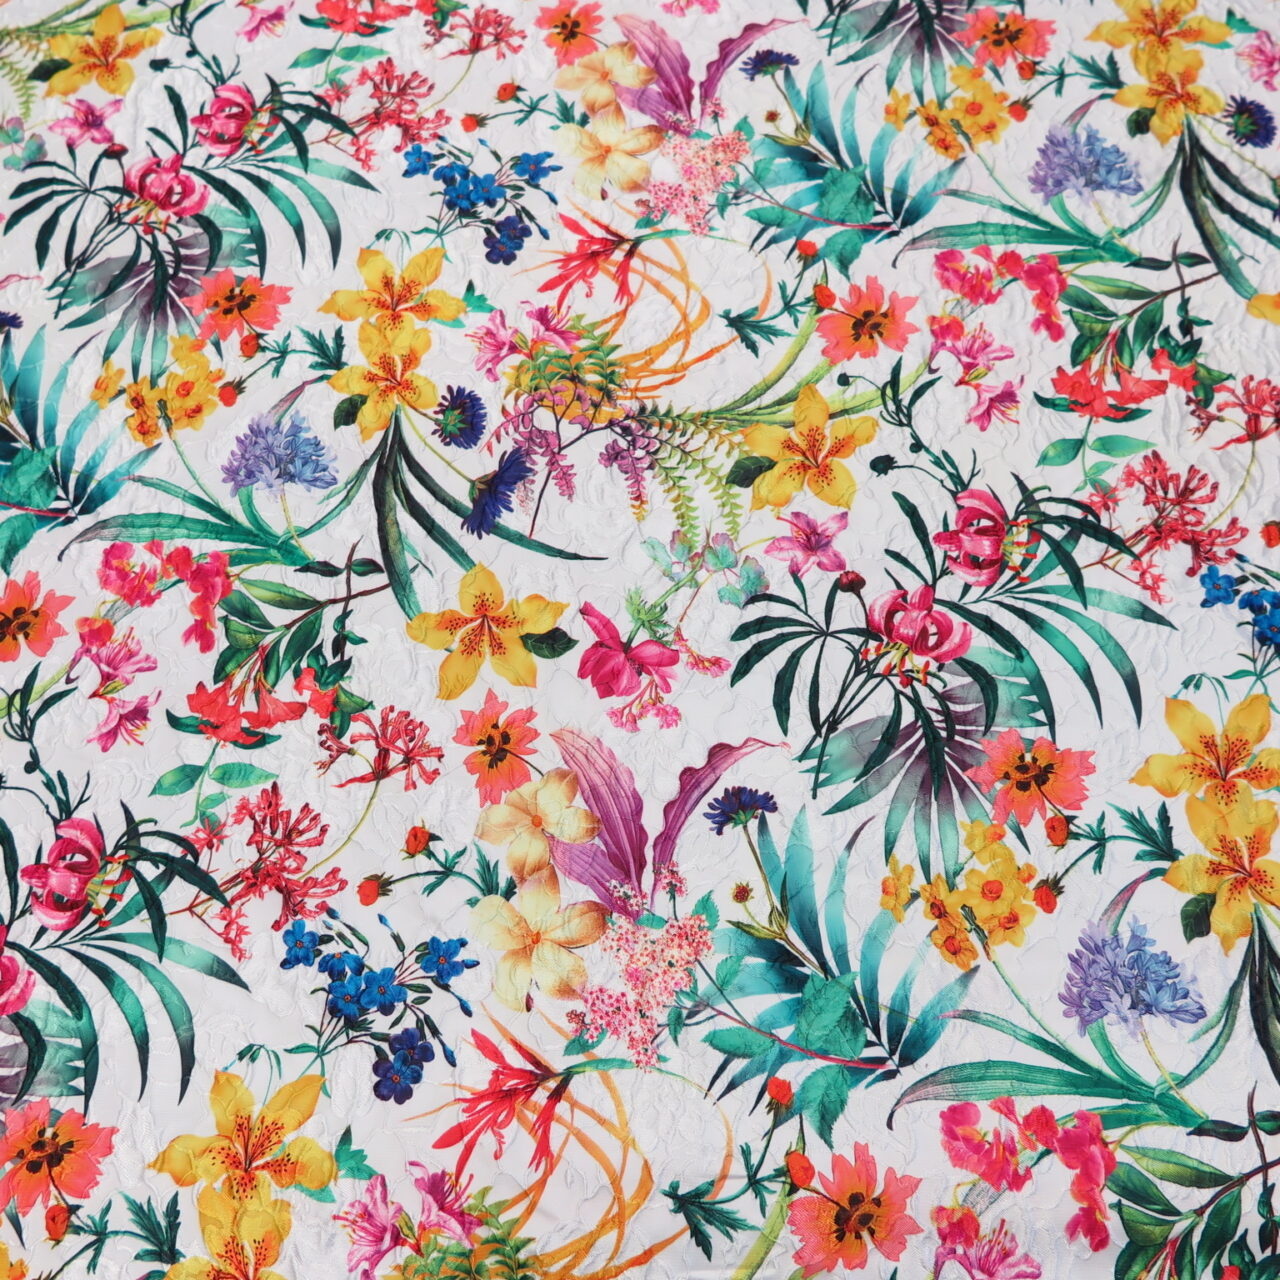 Jacquard Fabric with Colorful, Popping Floral Pattern • Promenade Fine ...